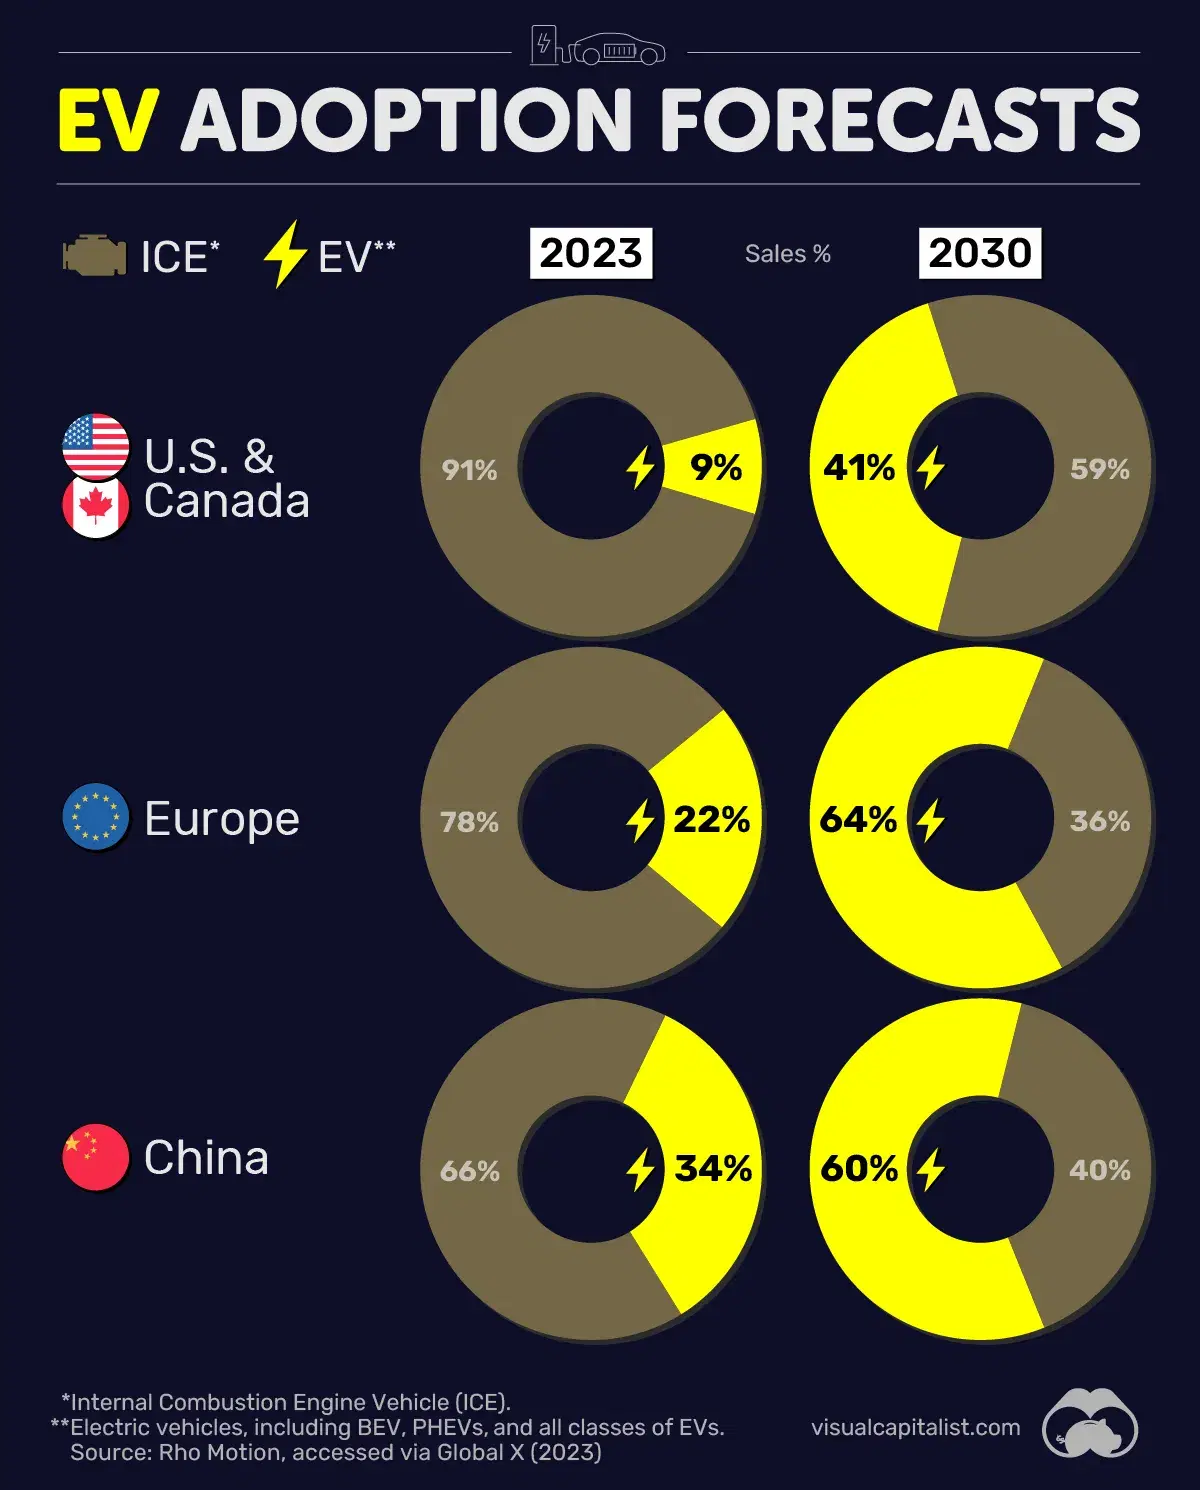 Over 60% of Cars Sold in Europe and China Will Be Electric by 2030